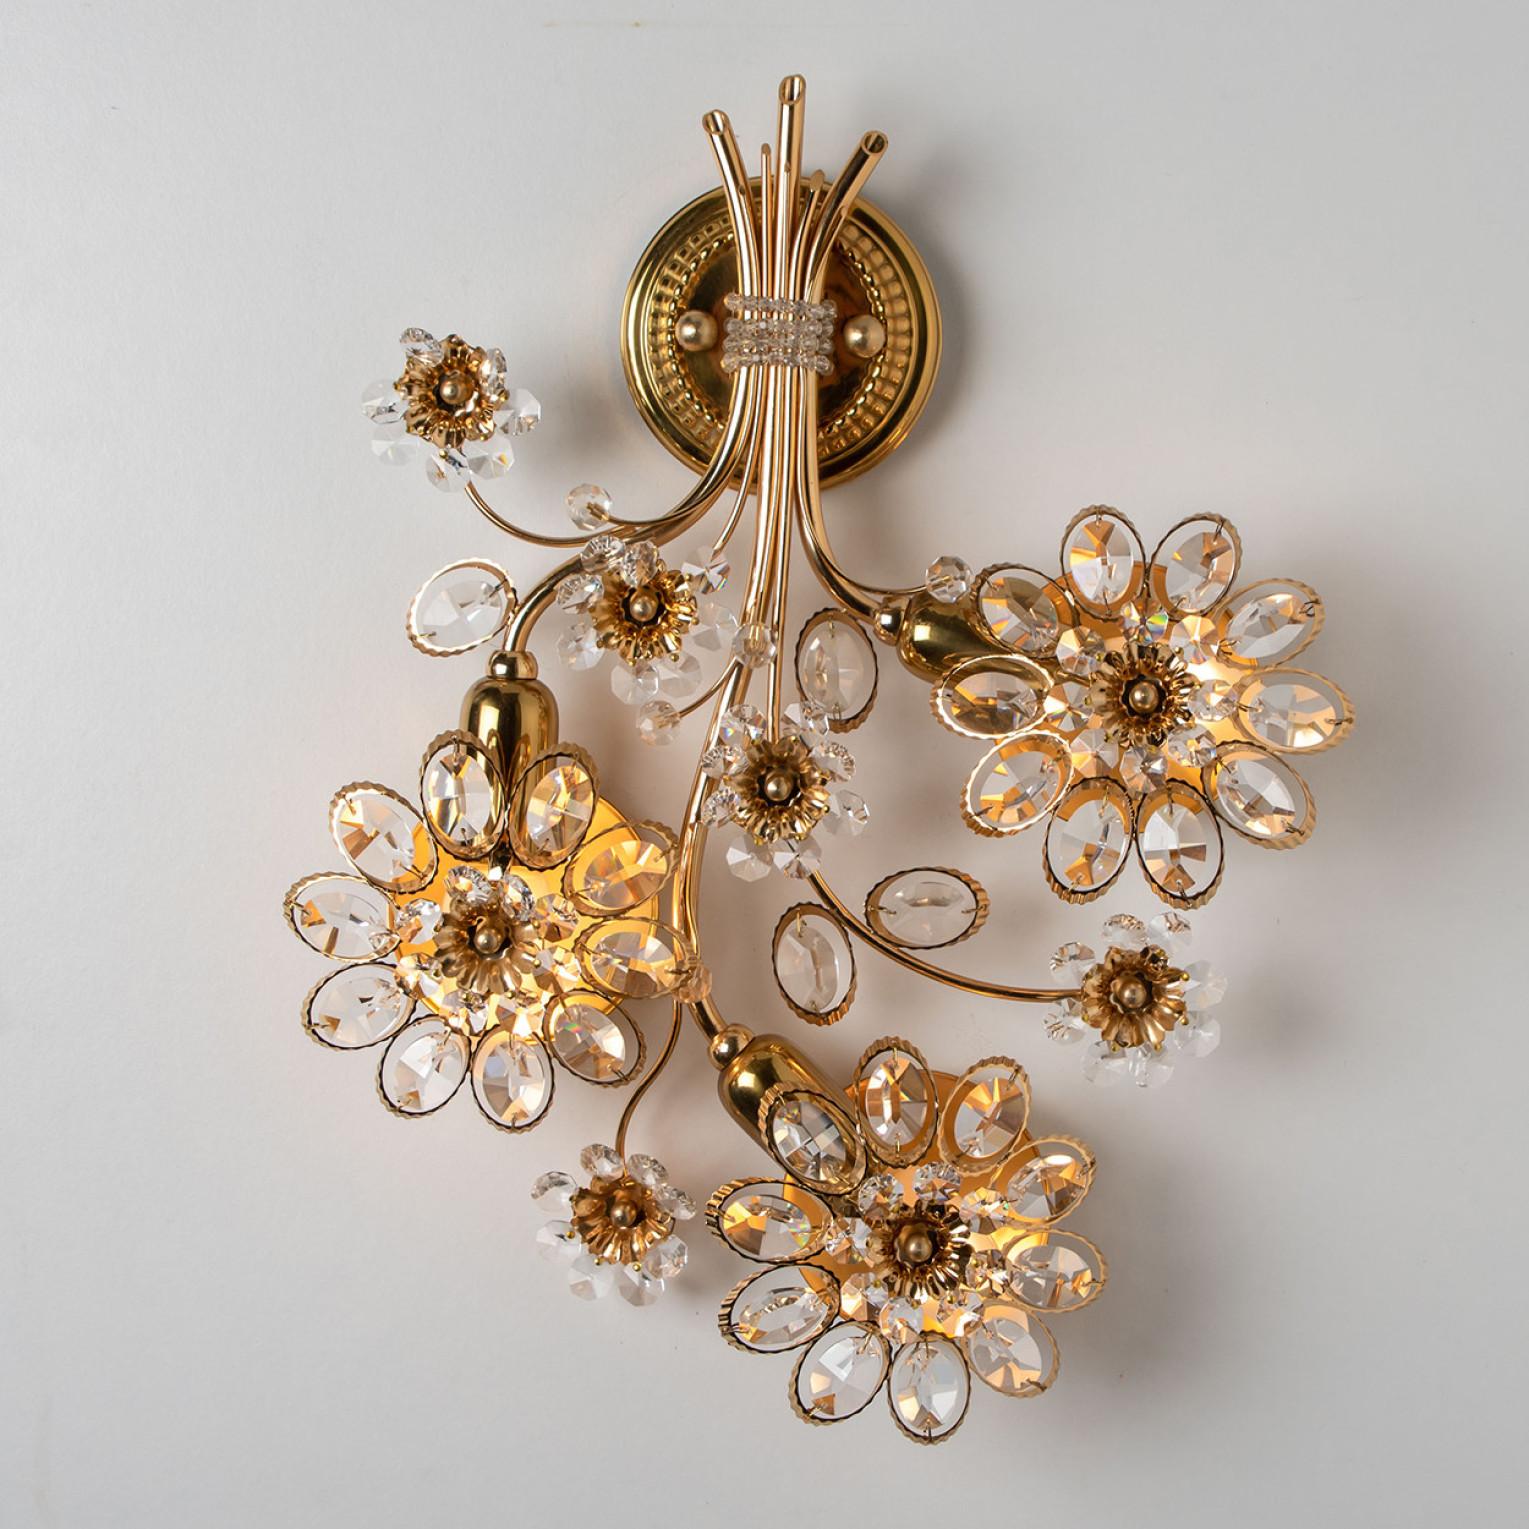 A stunning gilt and crystal wall-mounted sconce by Palwa, Germany. Manufactured around 1965-1975.
This luxurious wall light features beautifully cut crystals in the form of flowers and petals set on a gold-plated brass frame.

Measurements:
Heigth: